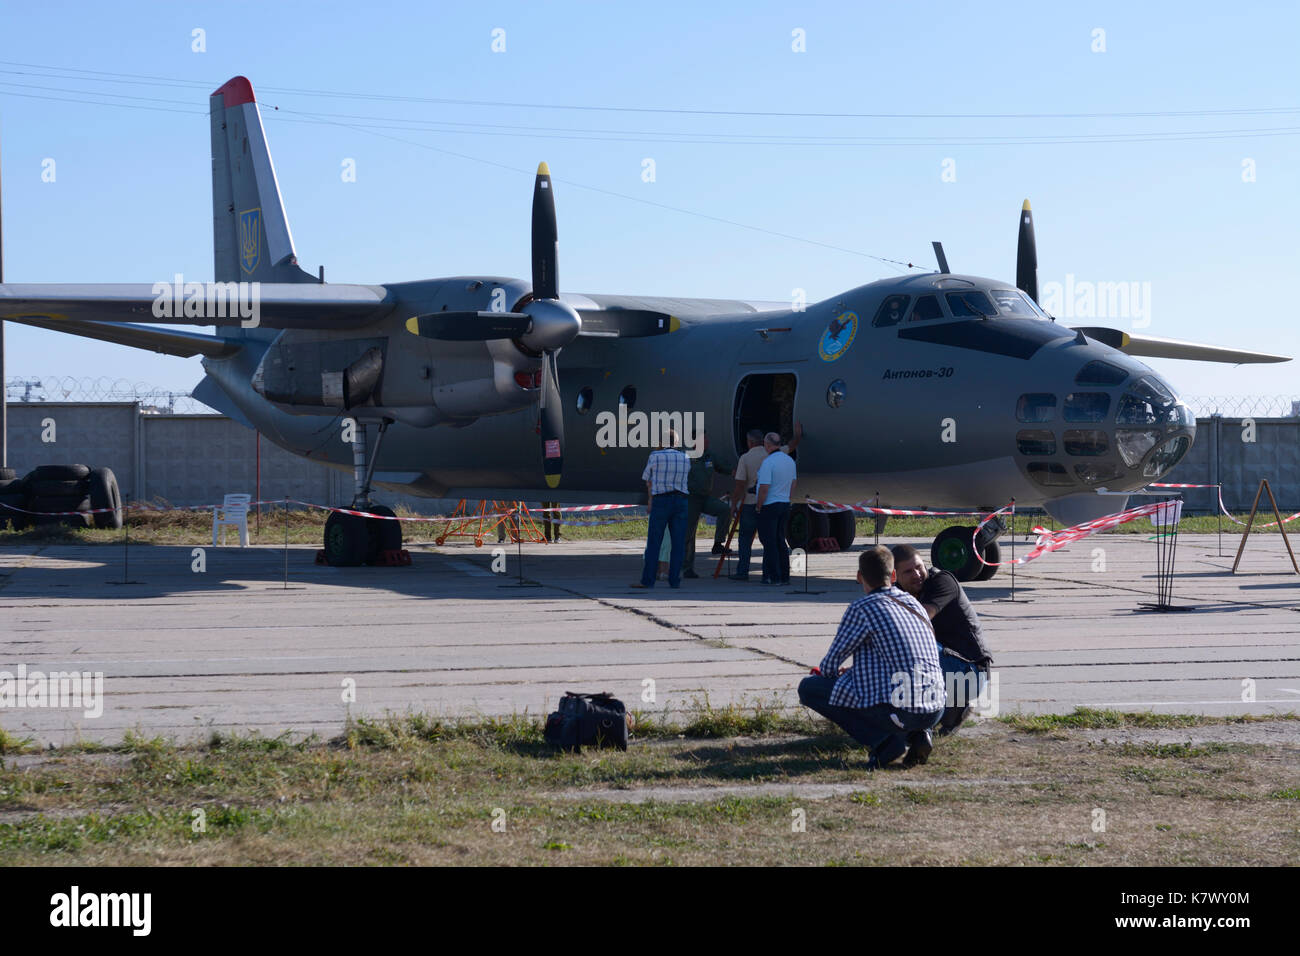 Antonov An-30 (NATO reporting name: Clank), an aerial cartography, reconnaissance and transport aircraft. Air show at Zhuljany airport. 16.09.2016 Stock Photo